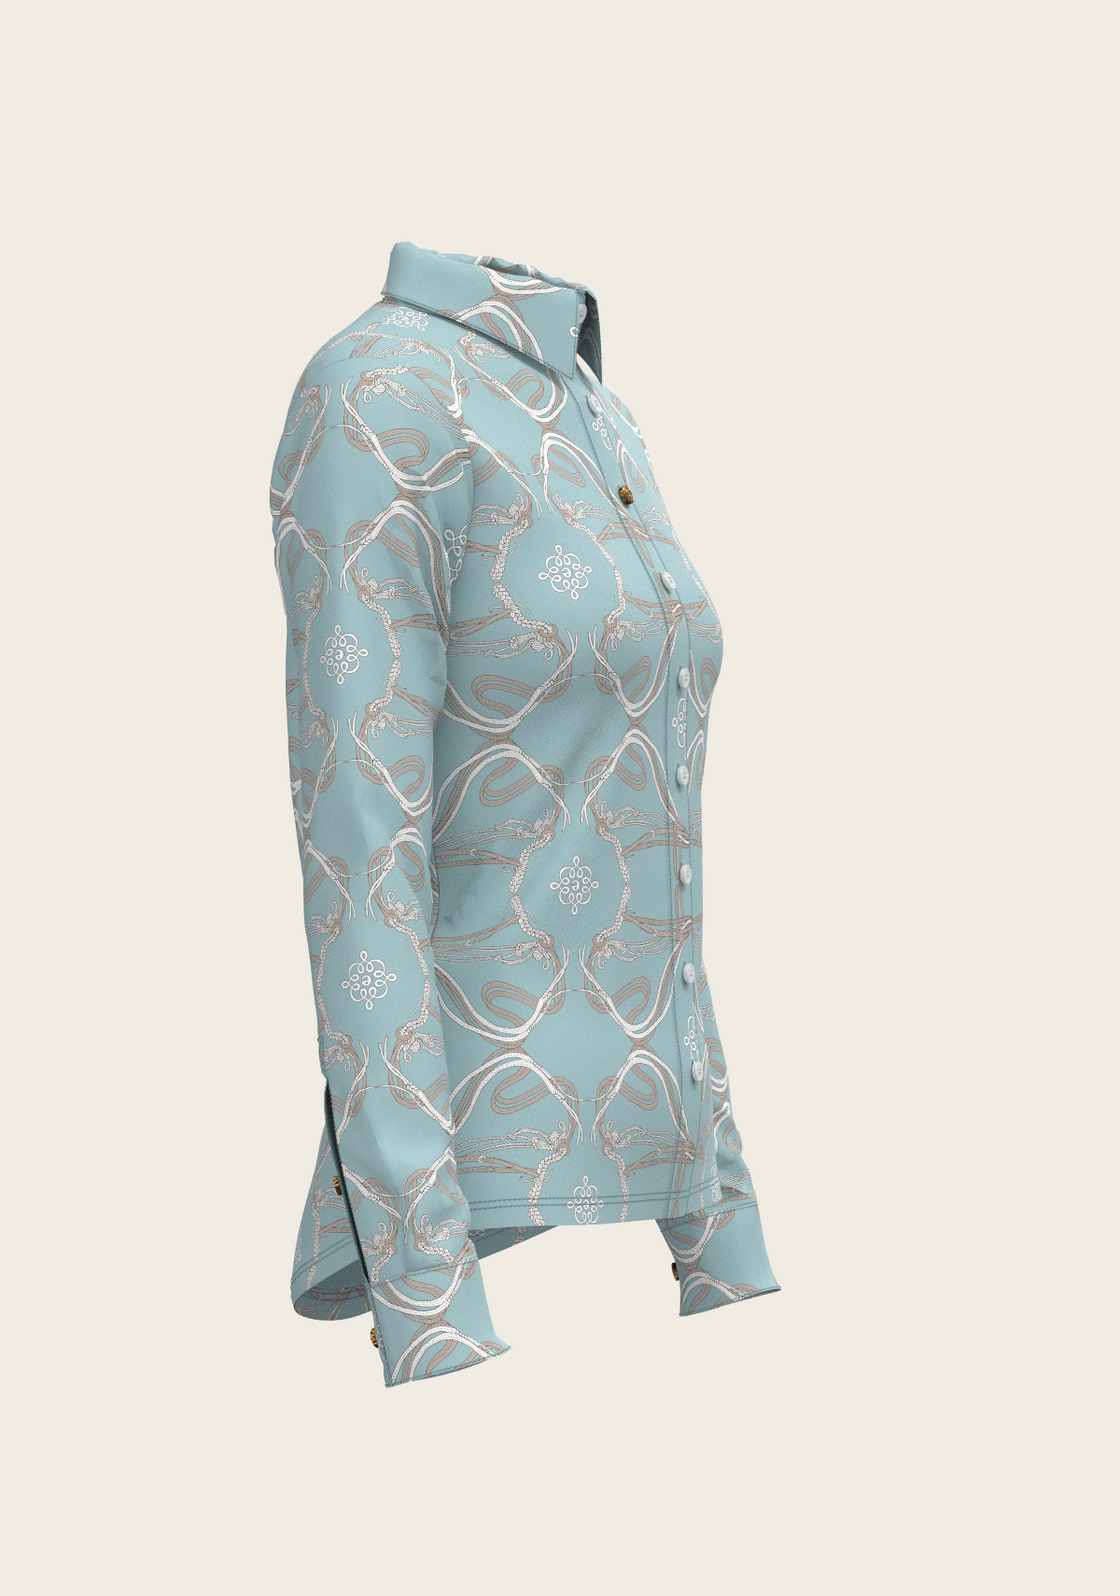 Roped Bridles on Sky Blue Ladies Button Shirt